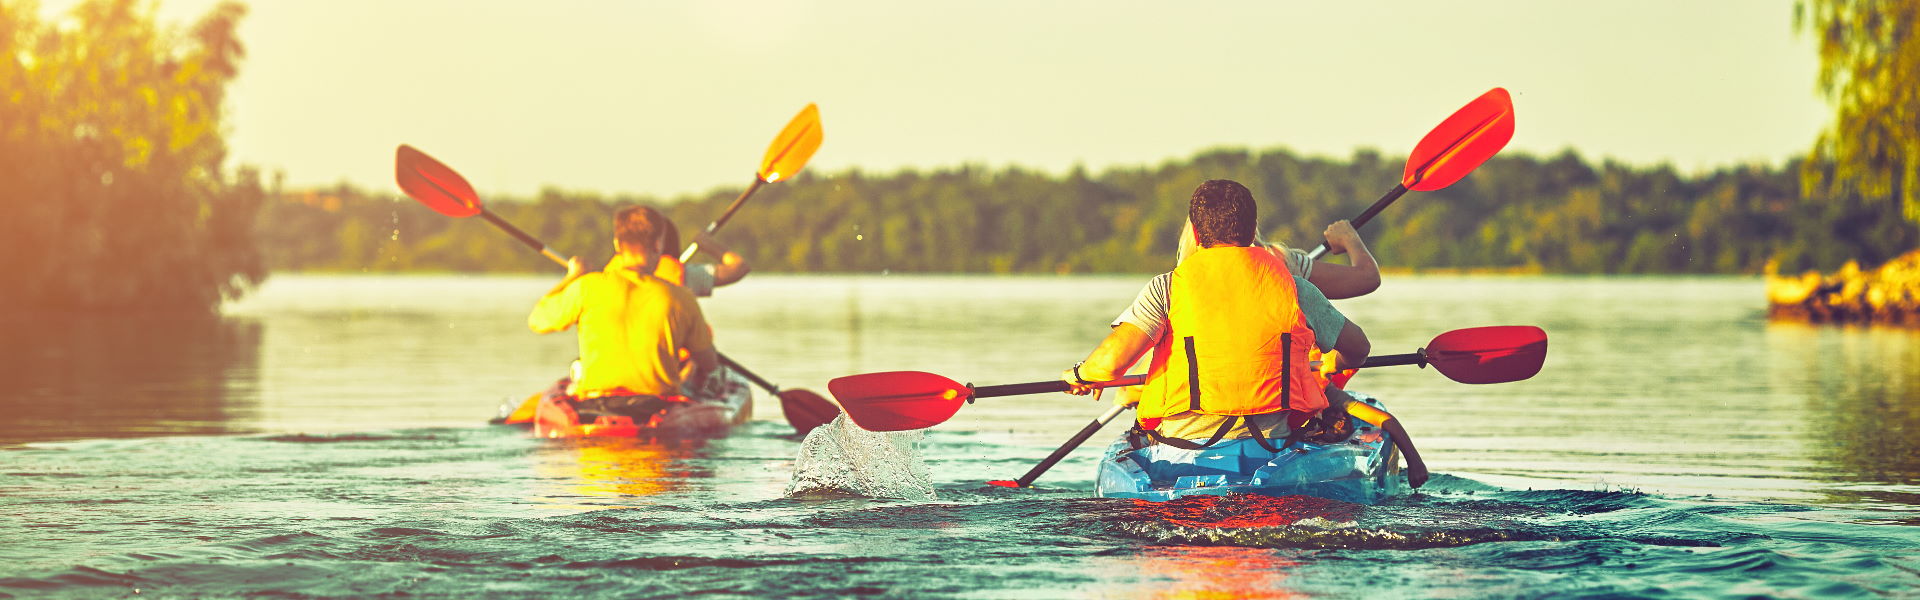 Image showing people in two twin kayaks